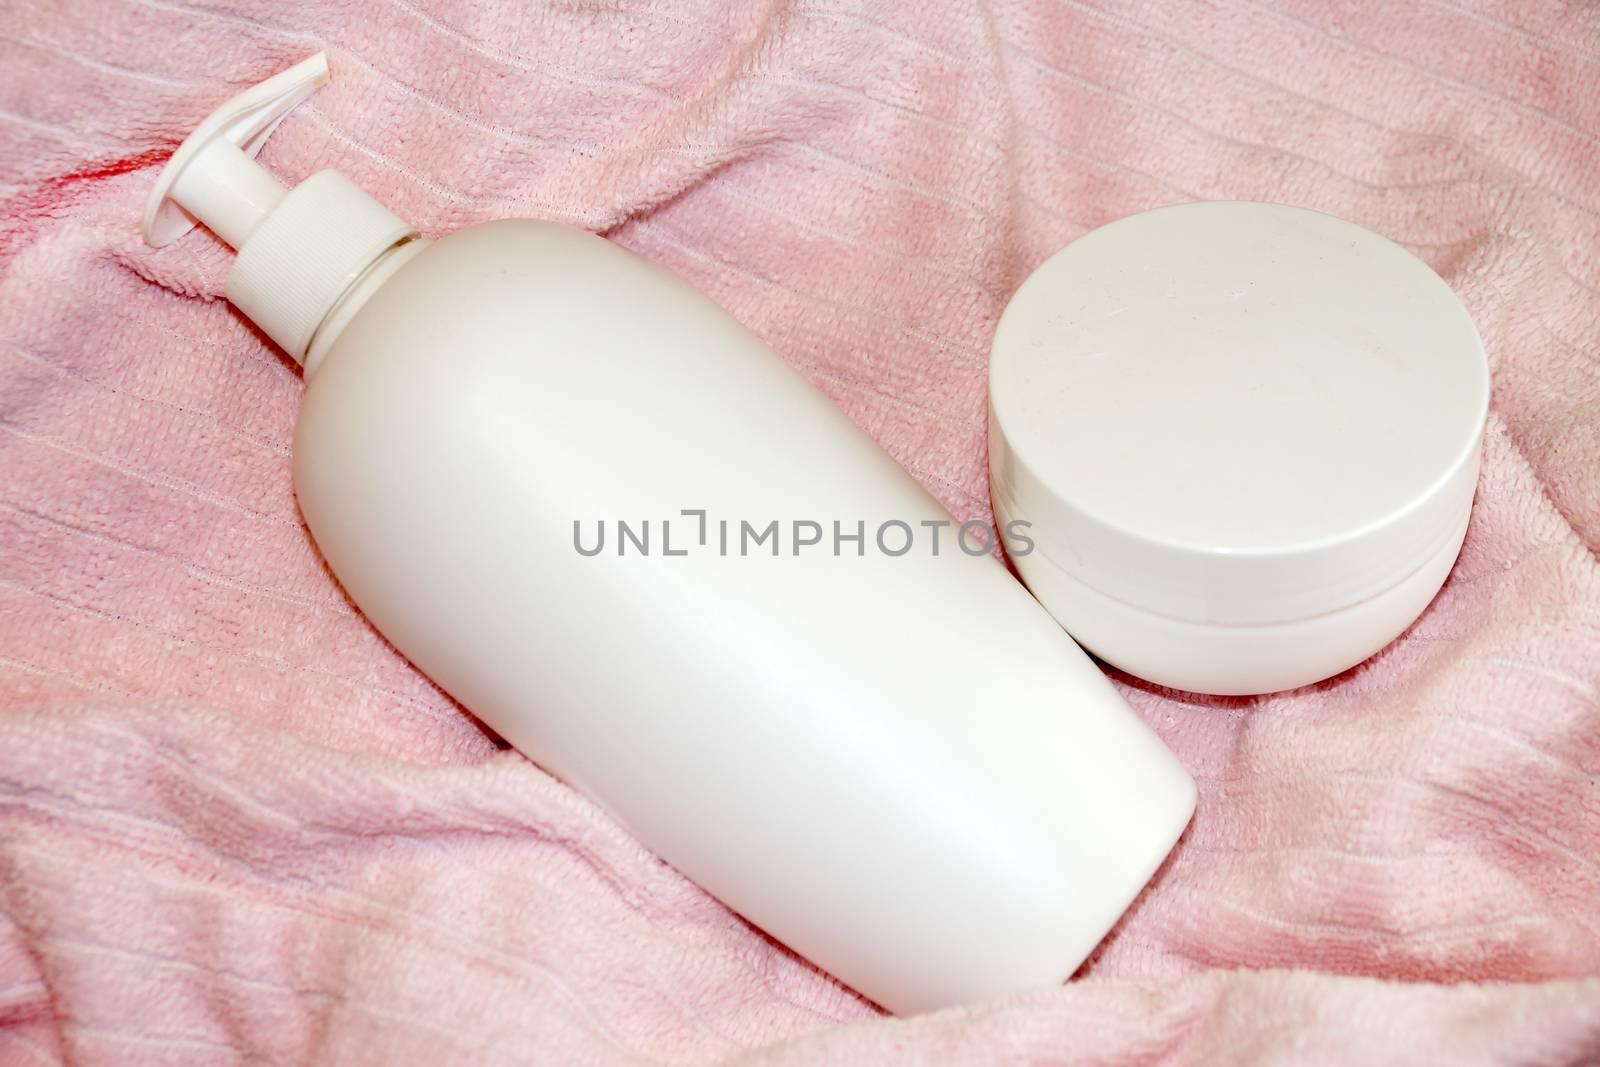 white cosmetic bottle and cream jar on pink terry cloth close-up